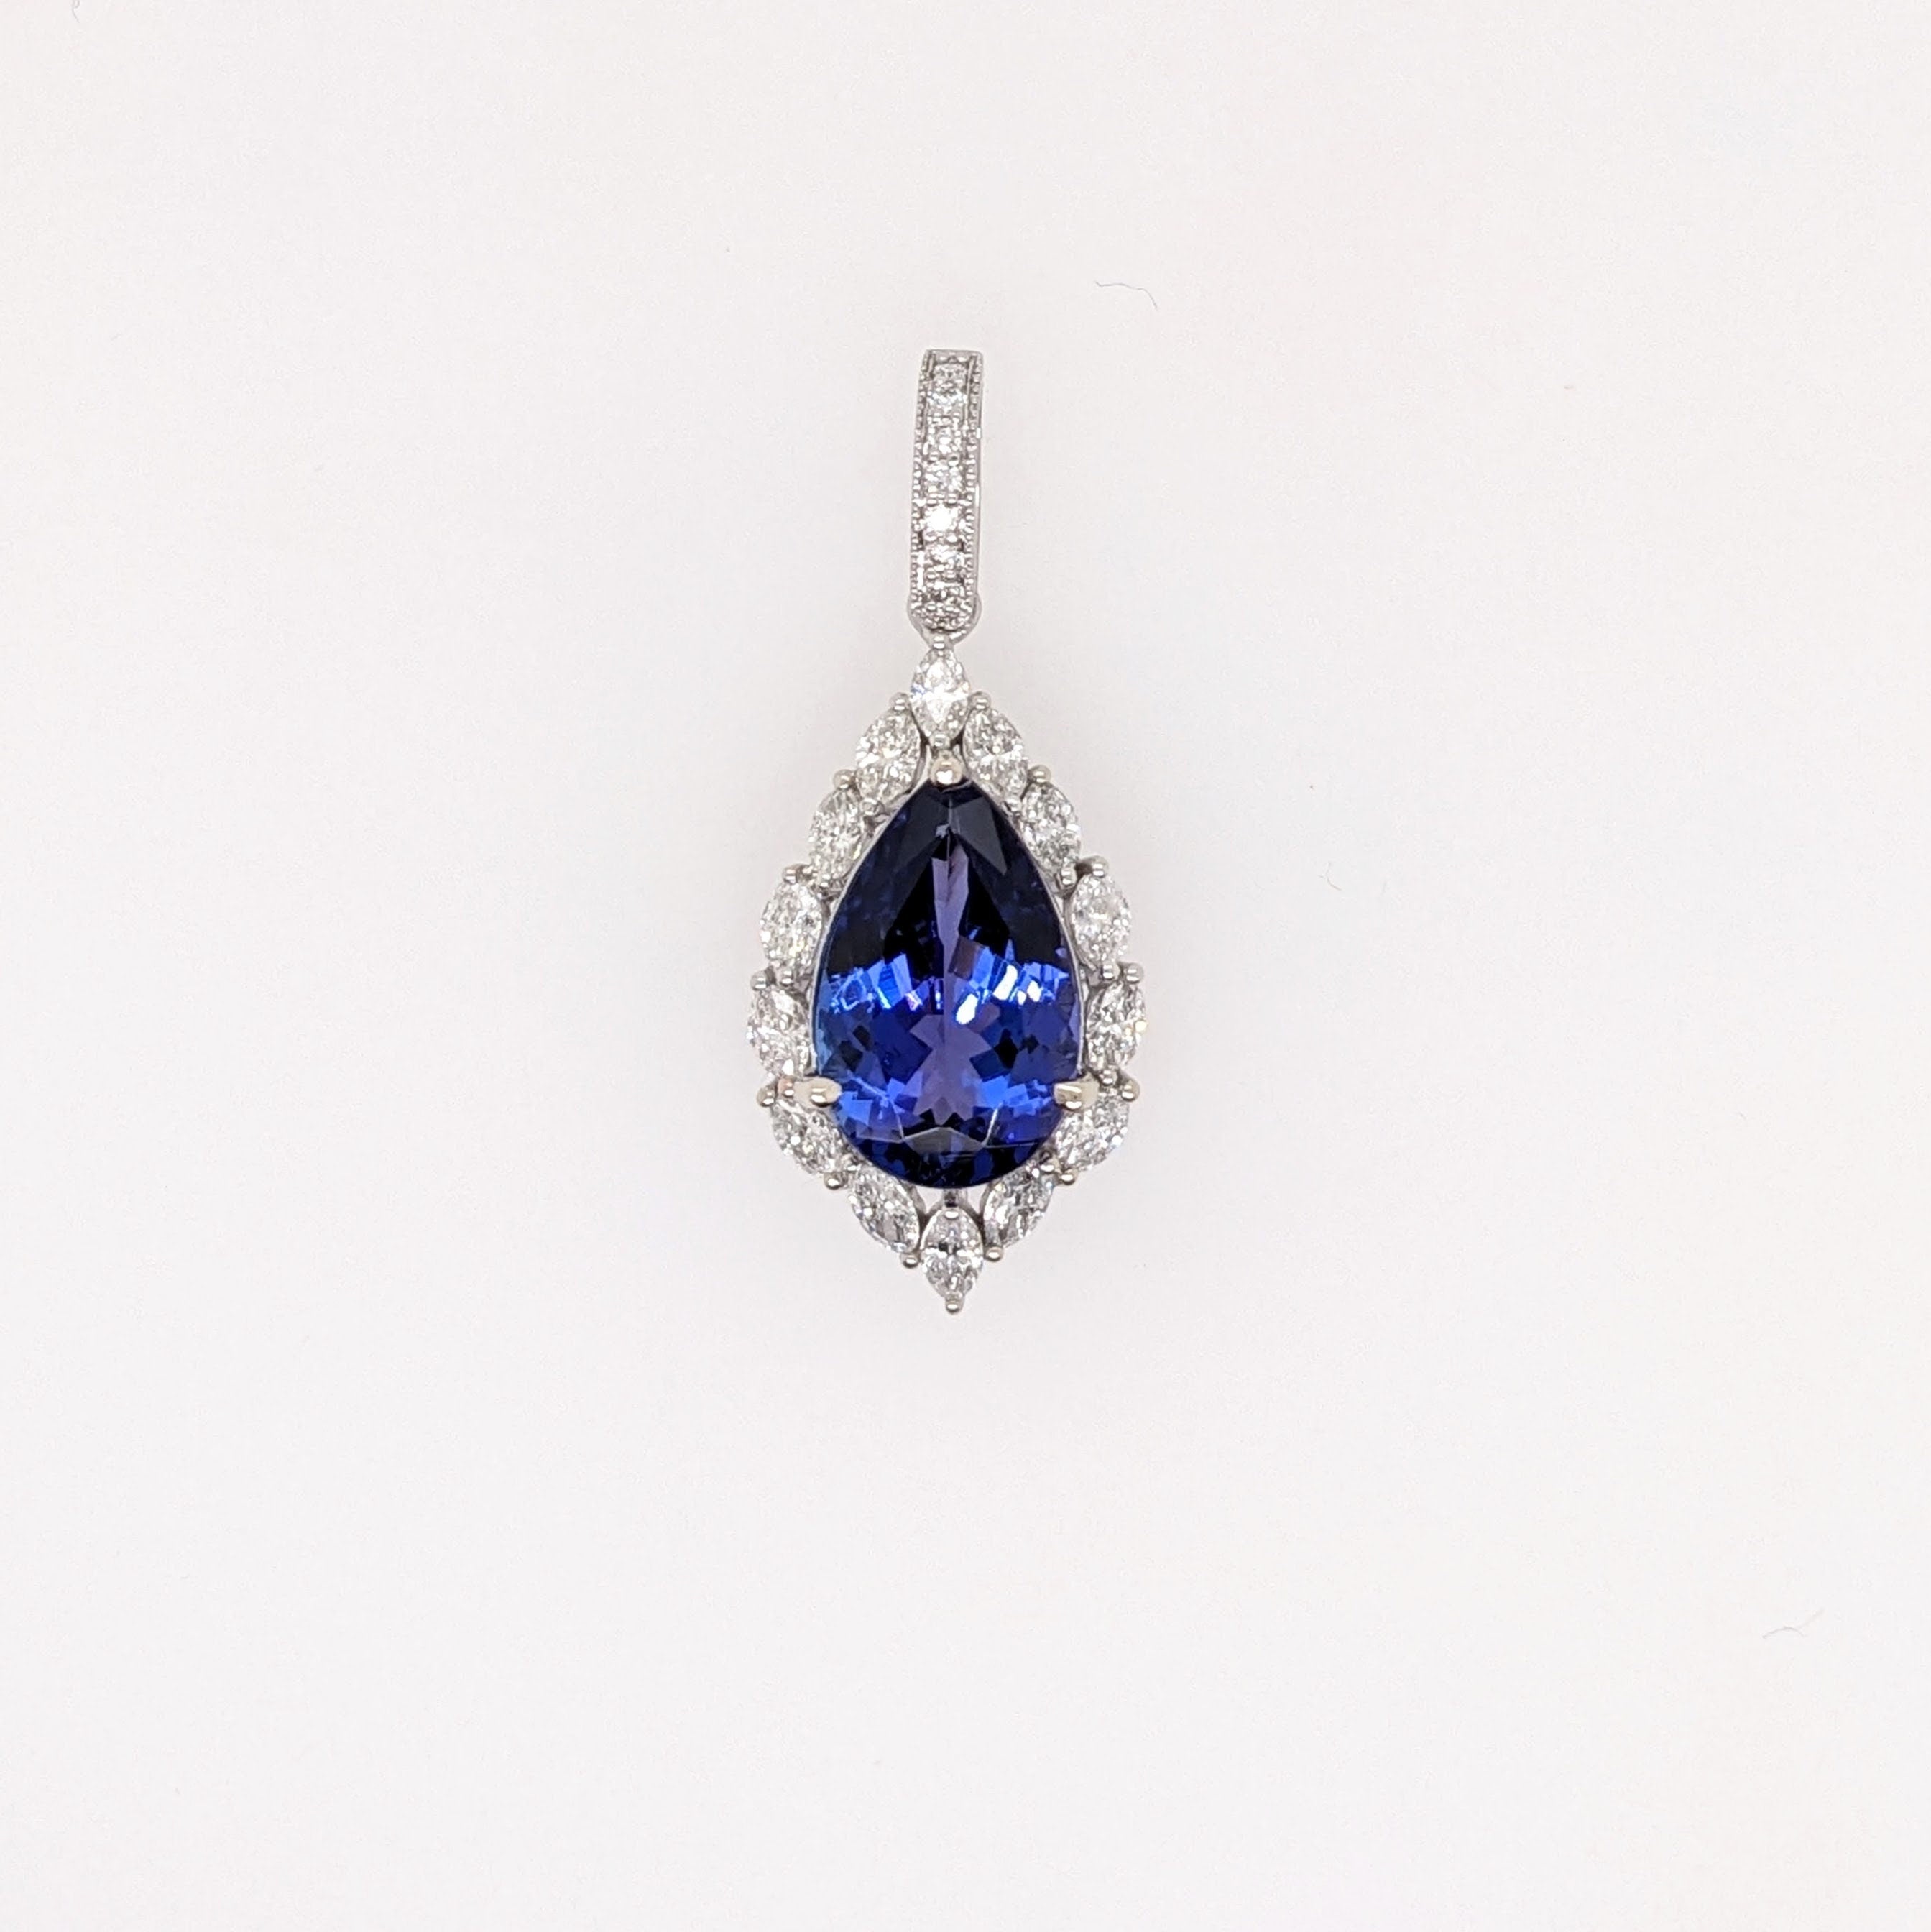 Stunning Deluxe Tanzanite Pendant in Solid 14K White Gold with Natural Diamond Accents | Pear 12.7x8.5mm | December Birthstone | Necklace |